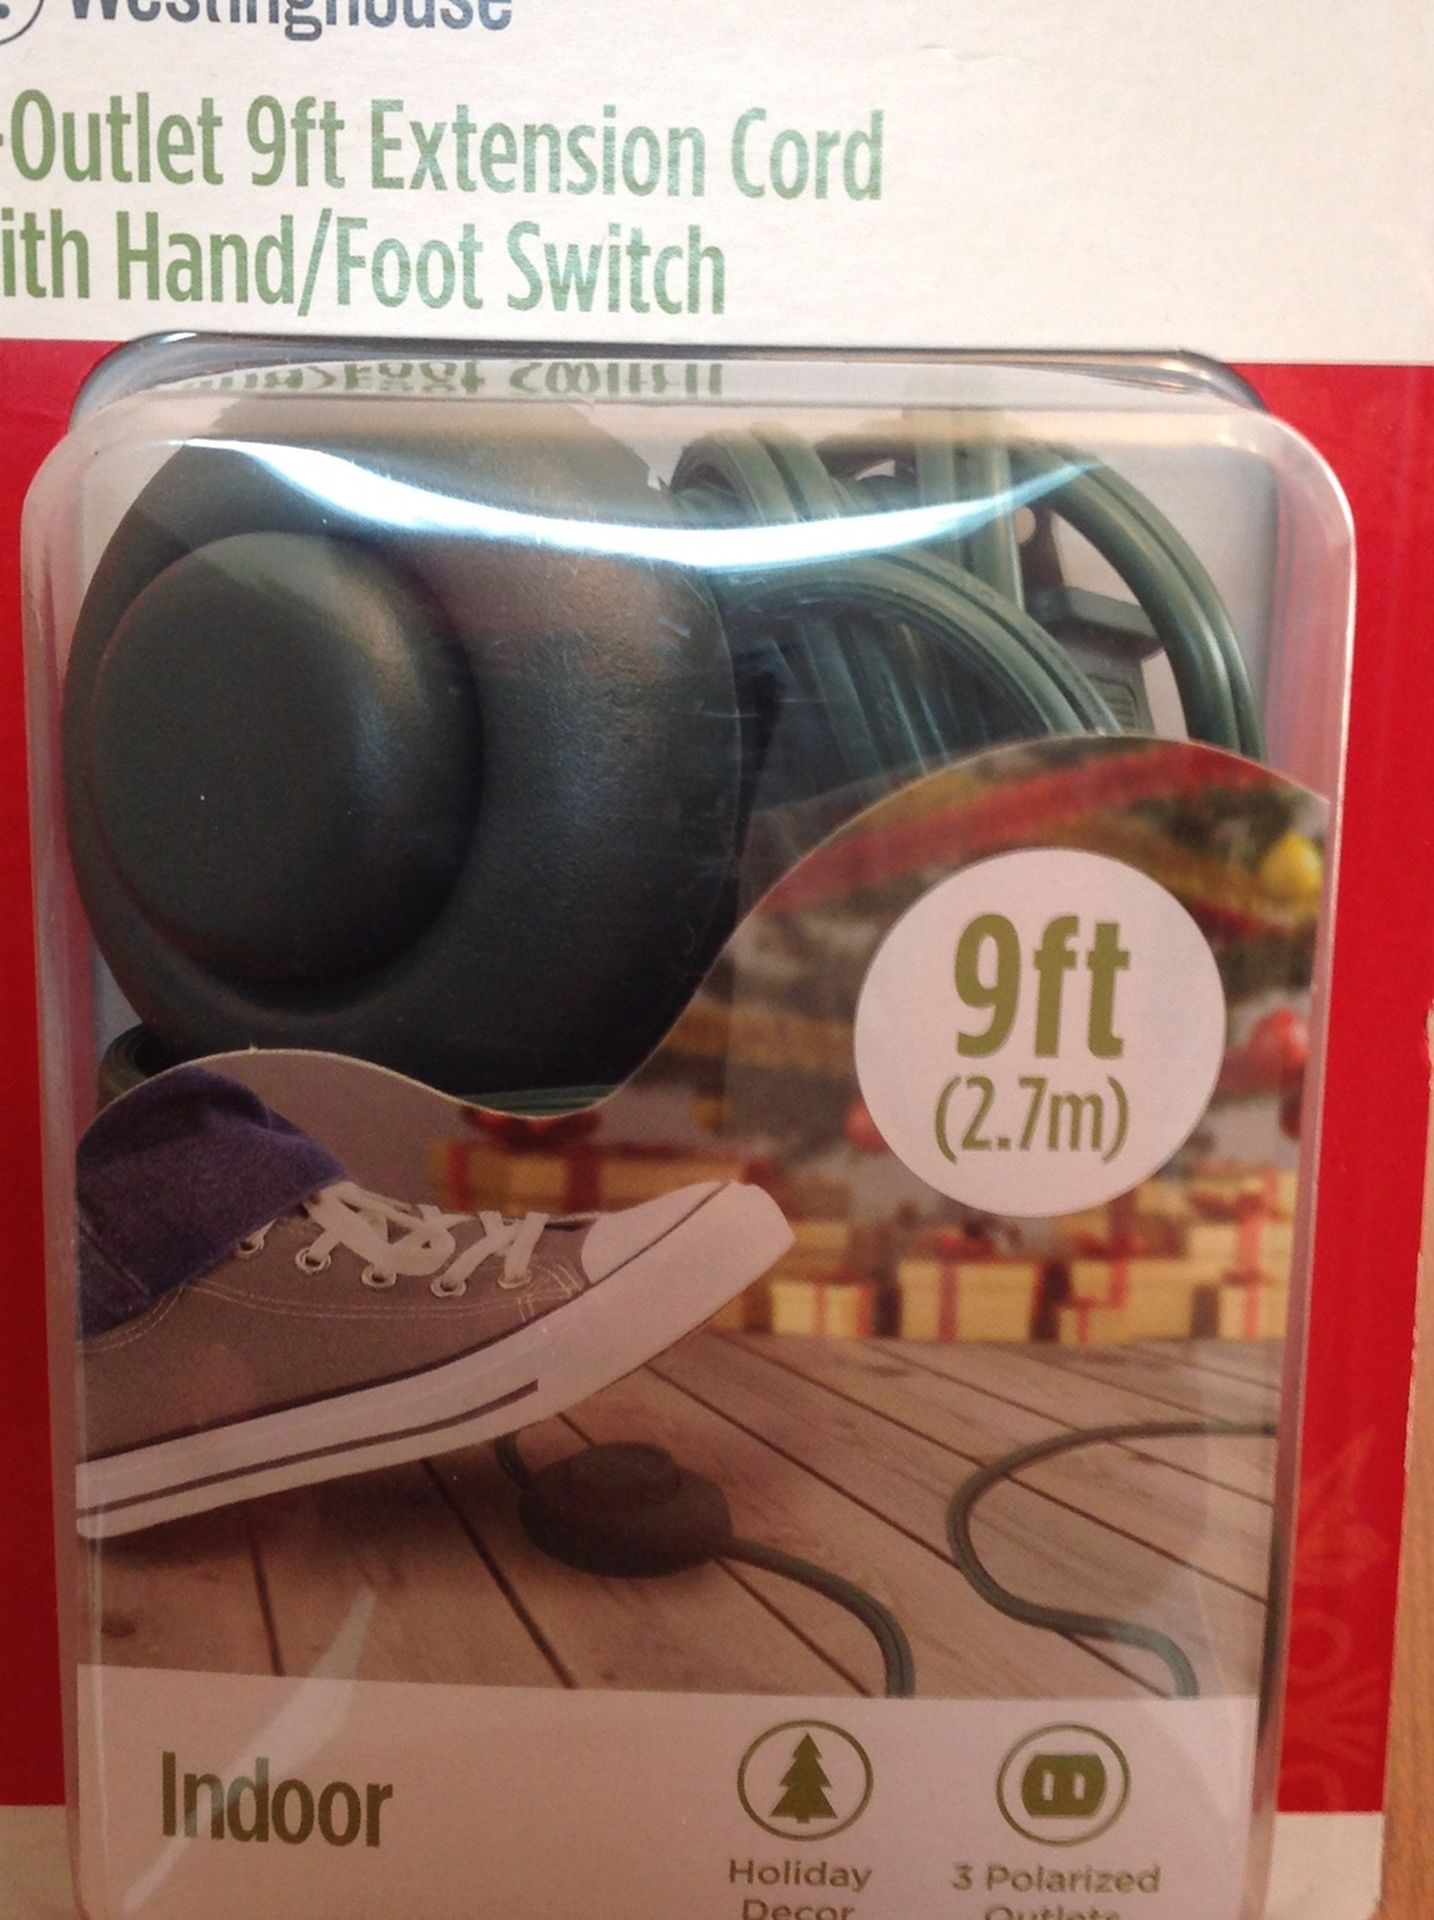 Three Outlet Christmas Tree Extension Cord with Foot/Hand switch. New in package. NE Garland Last one!